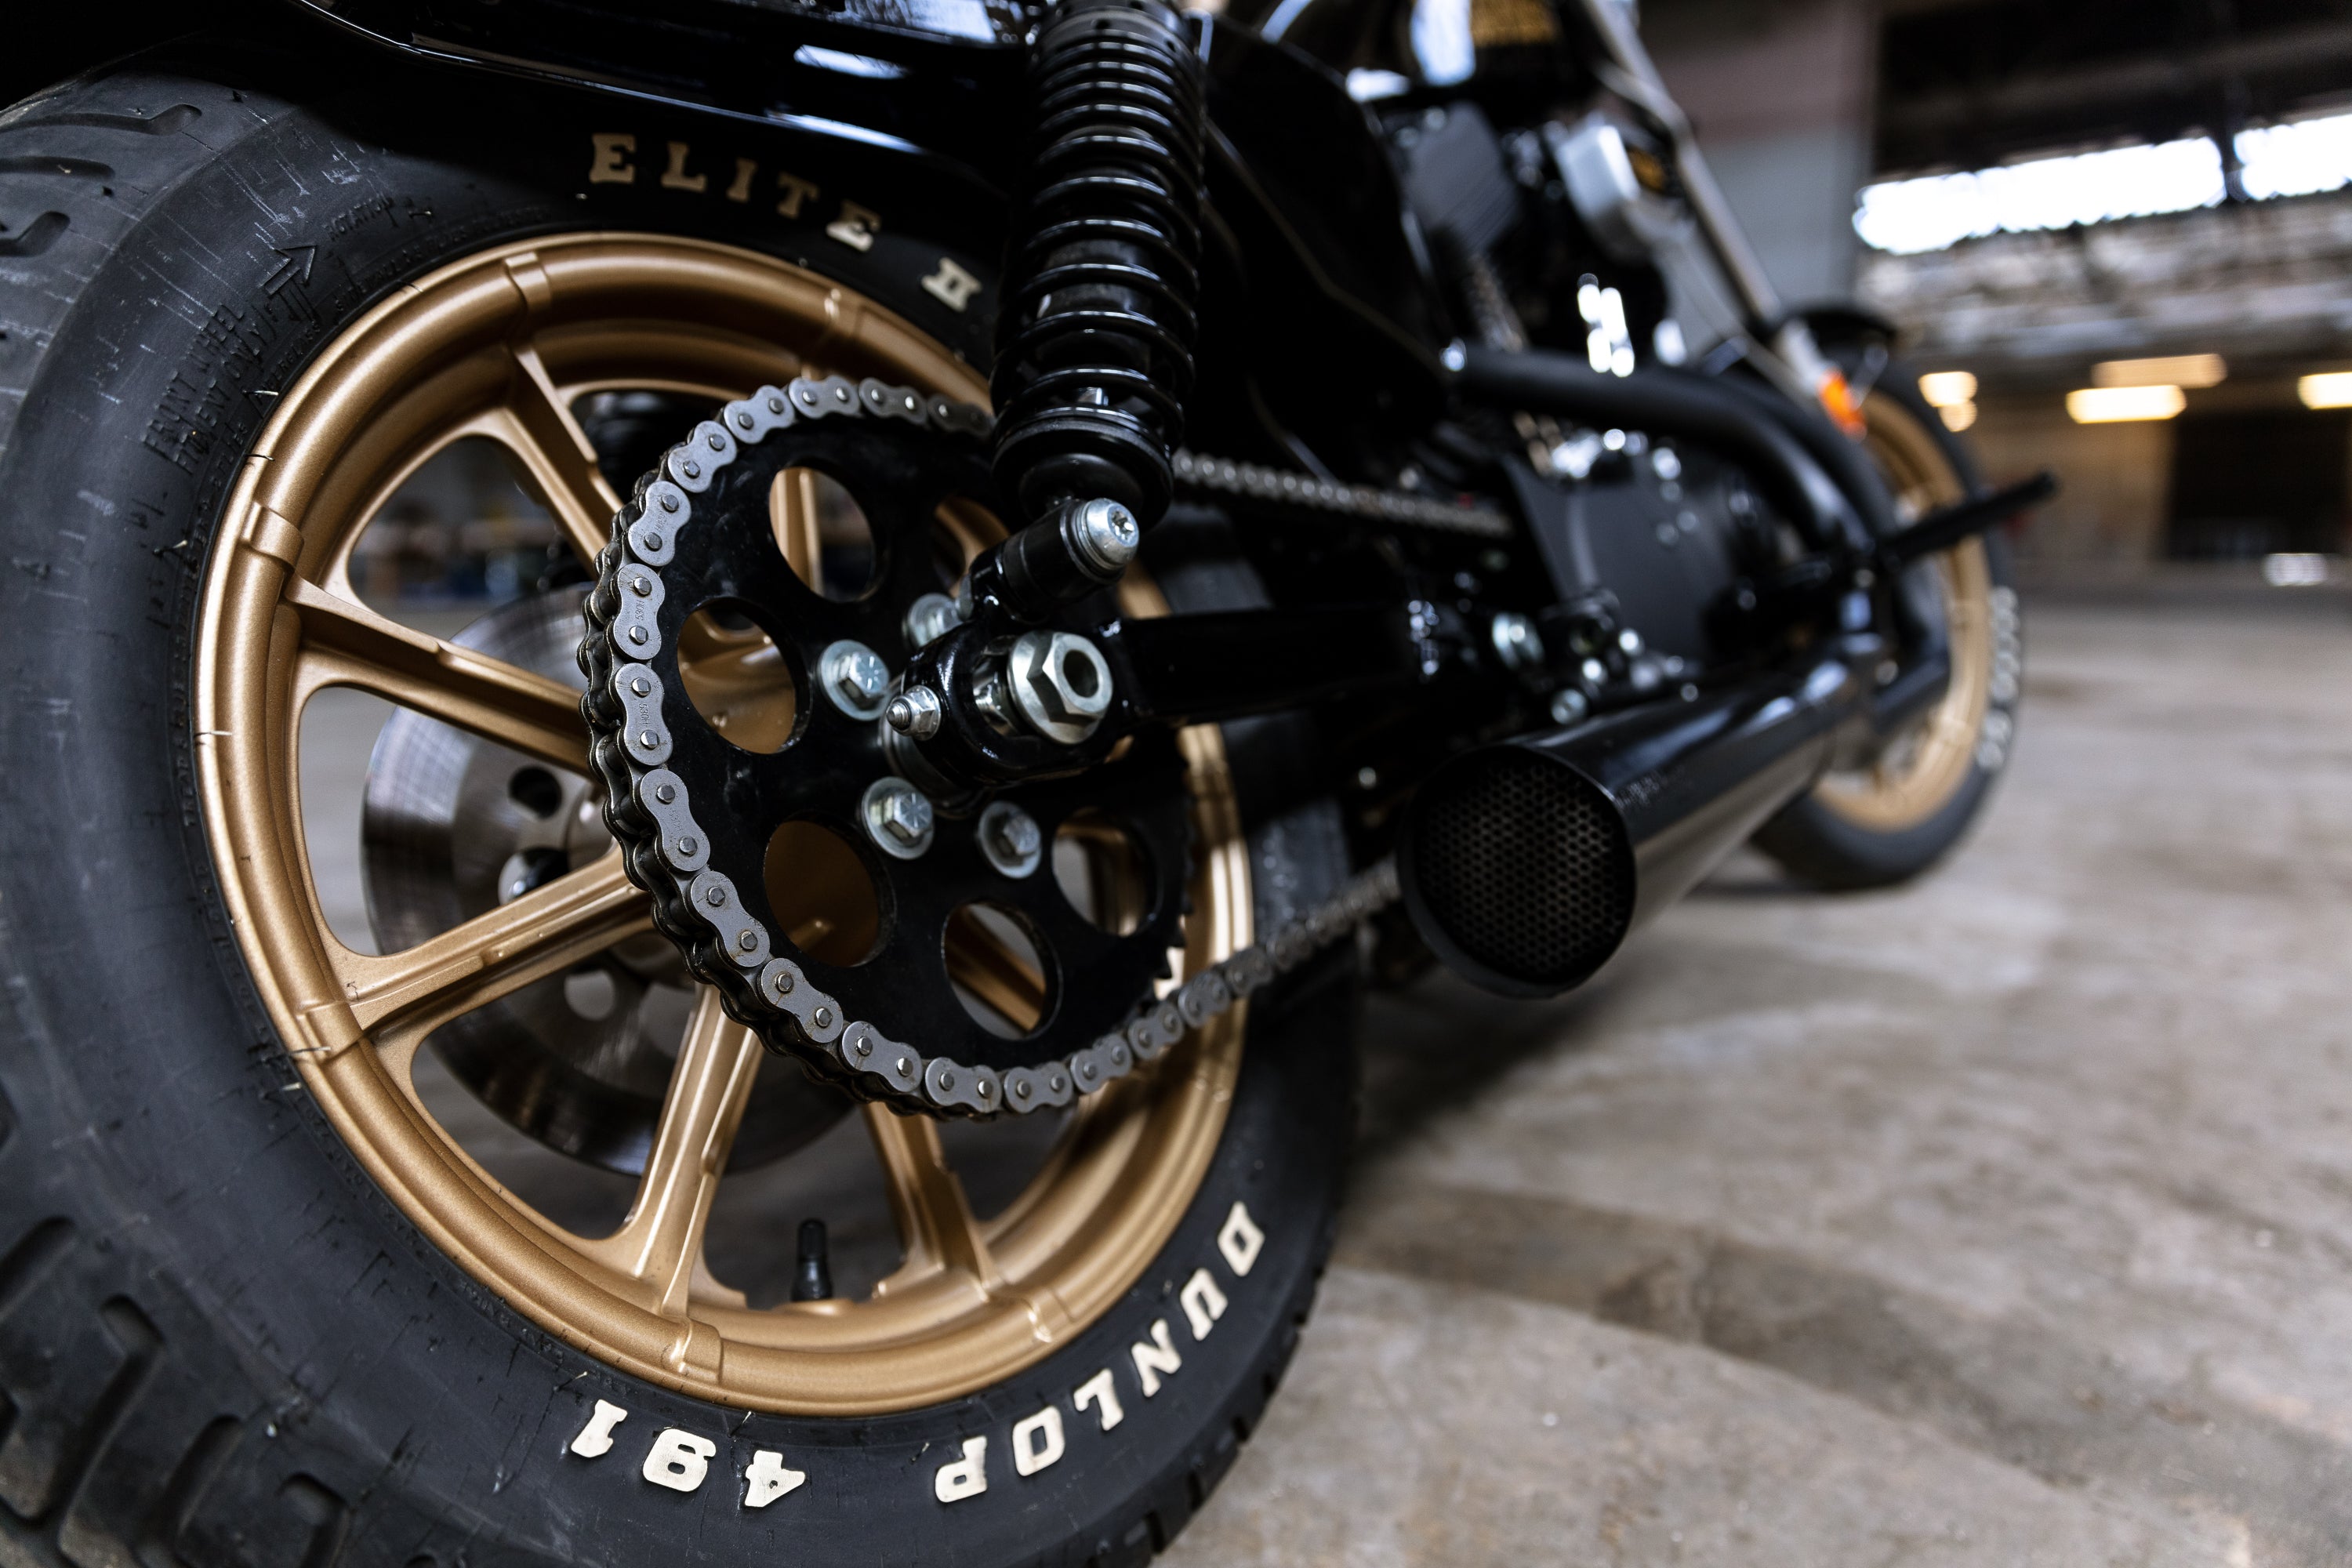 Harley Davidson x The Congregation Show - 2019 Iron 1200 Sportster Giveaway Bike Unveil 